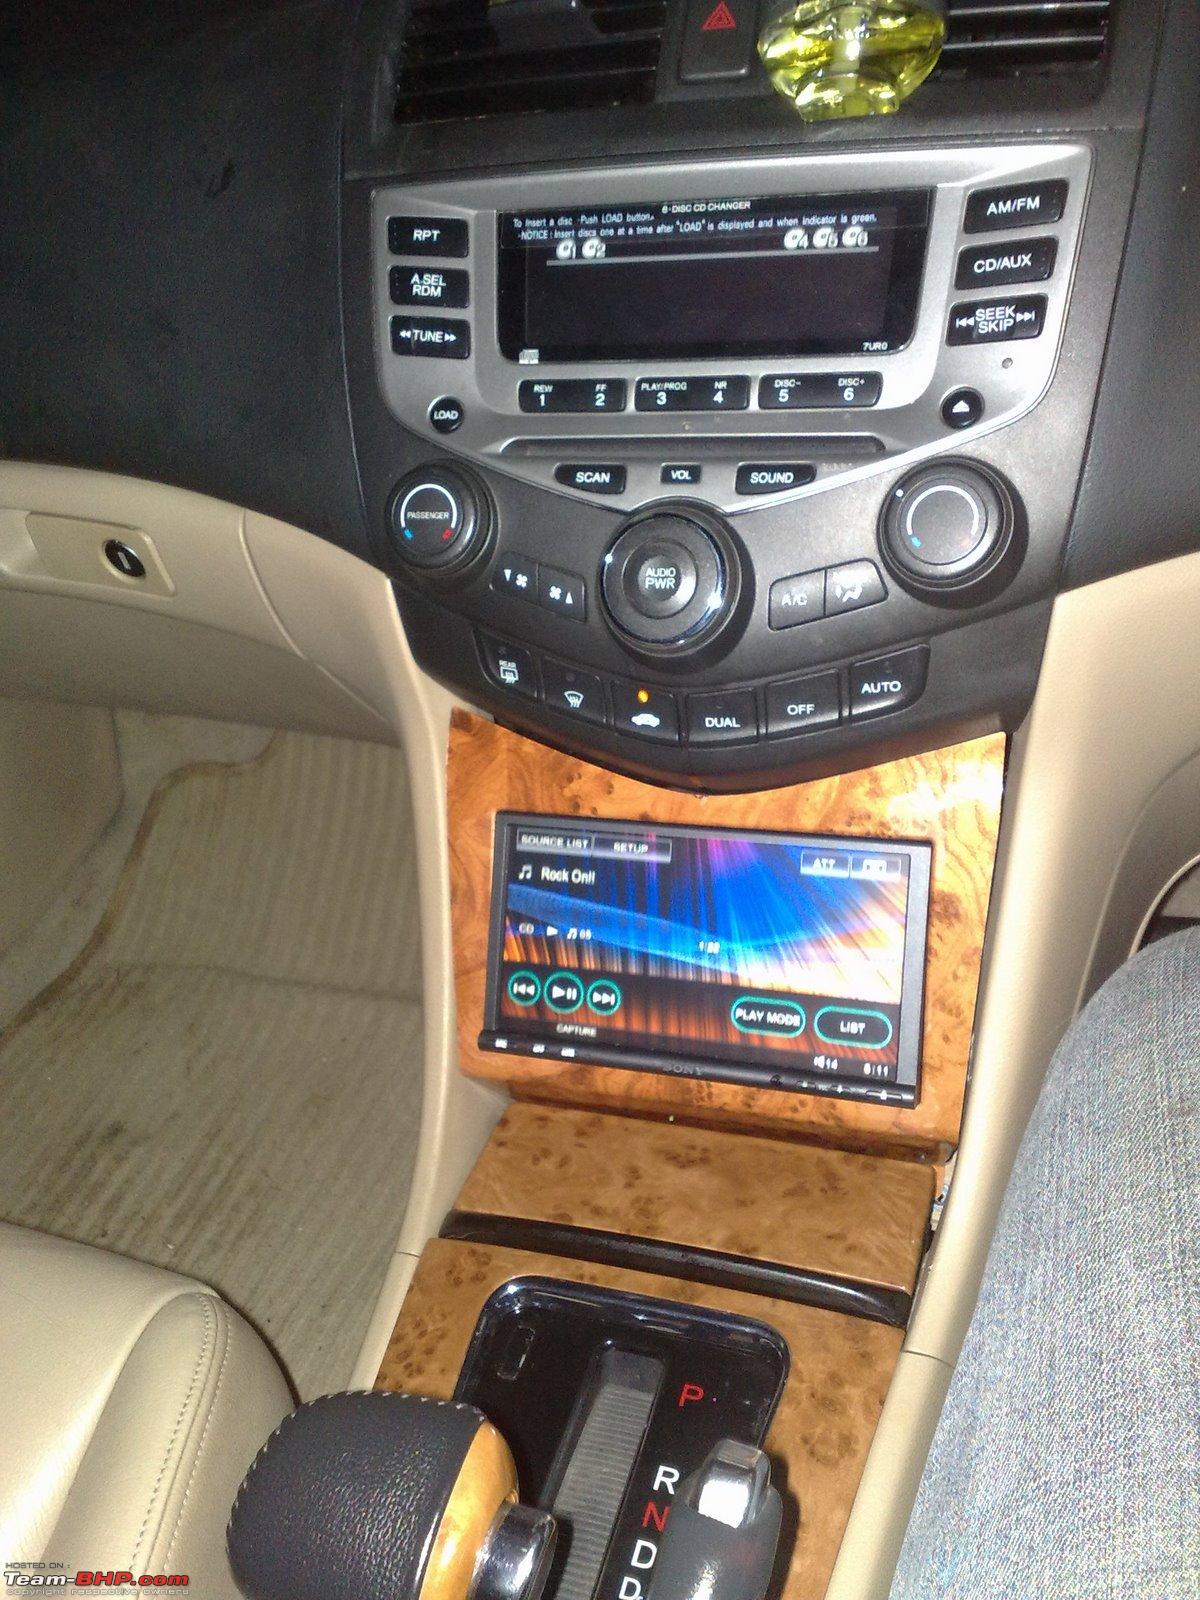 Double Din DVD in my honda Accord v6 AT - Team-BHP